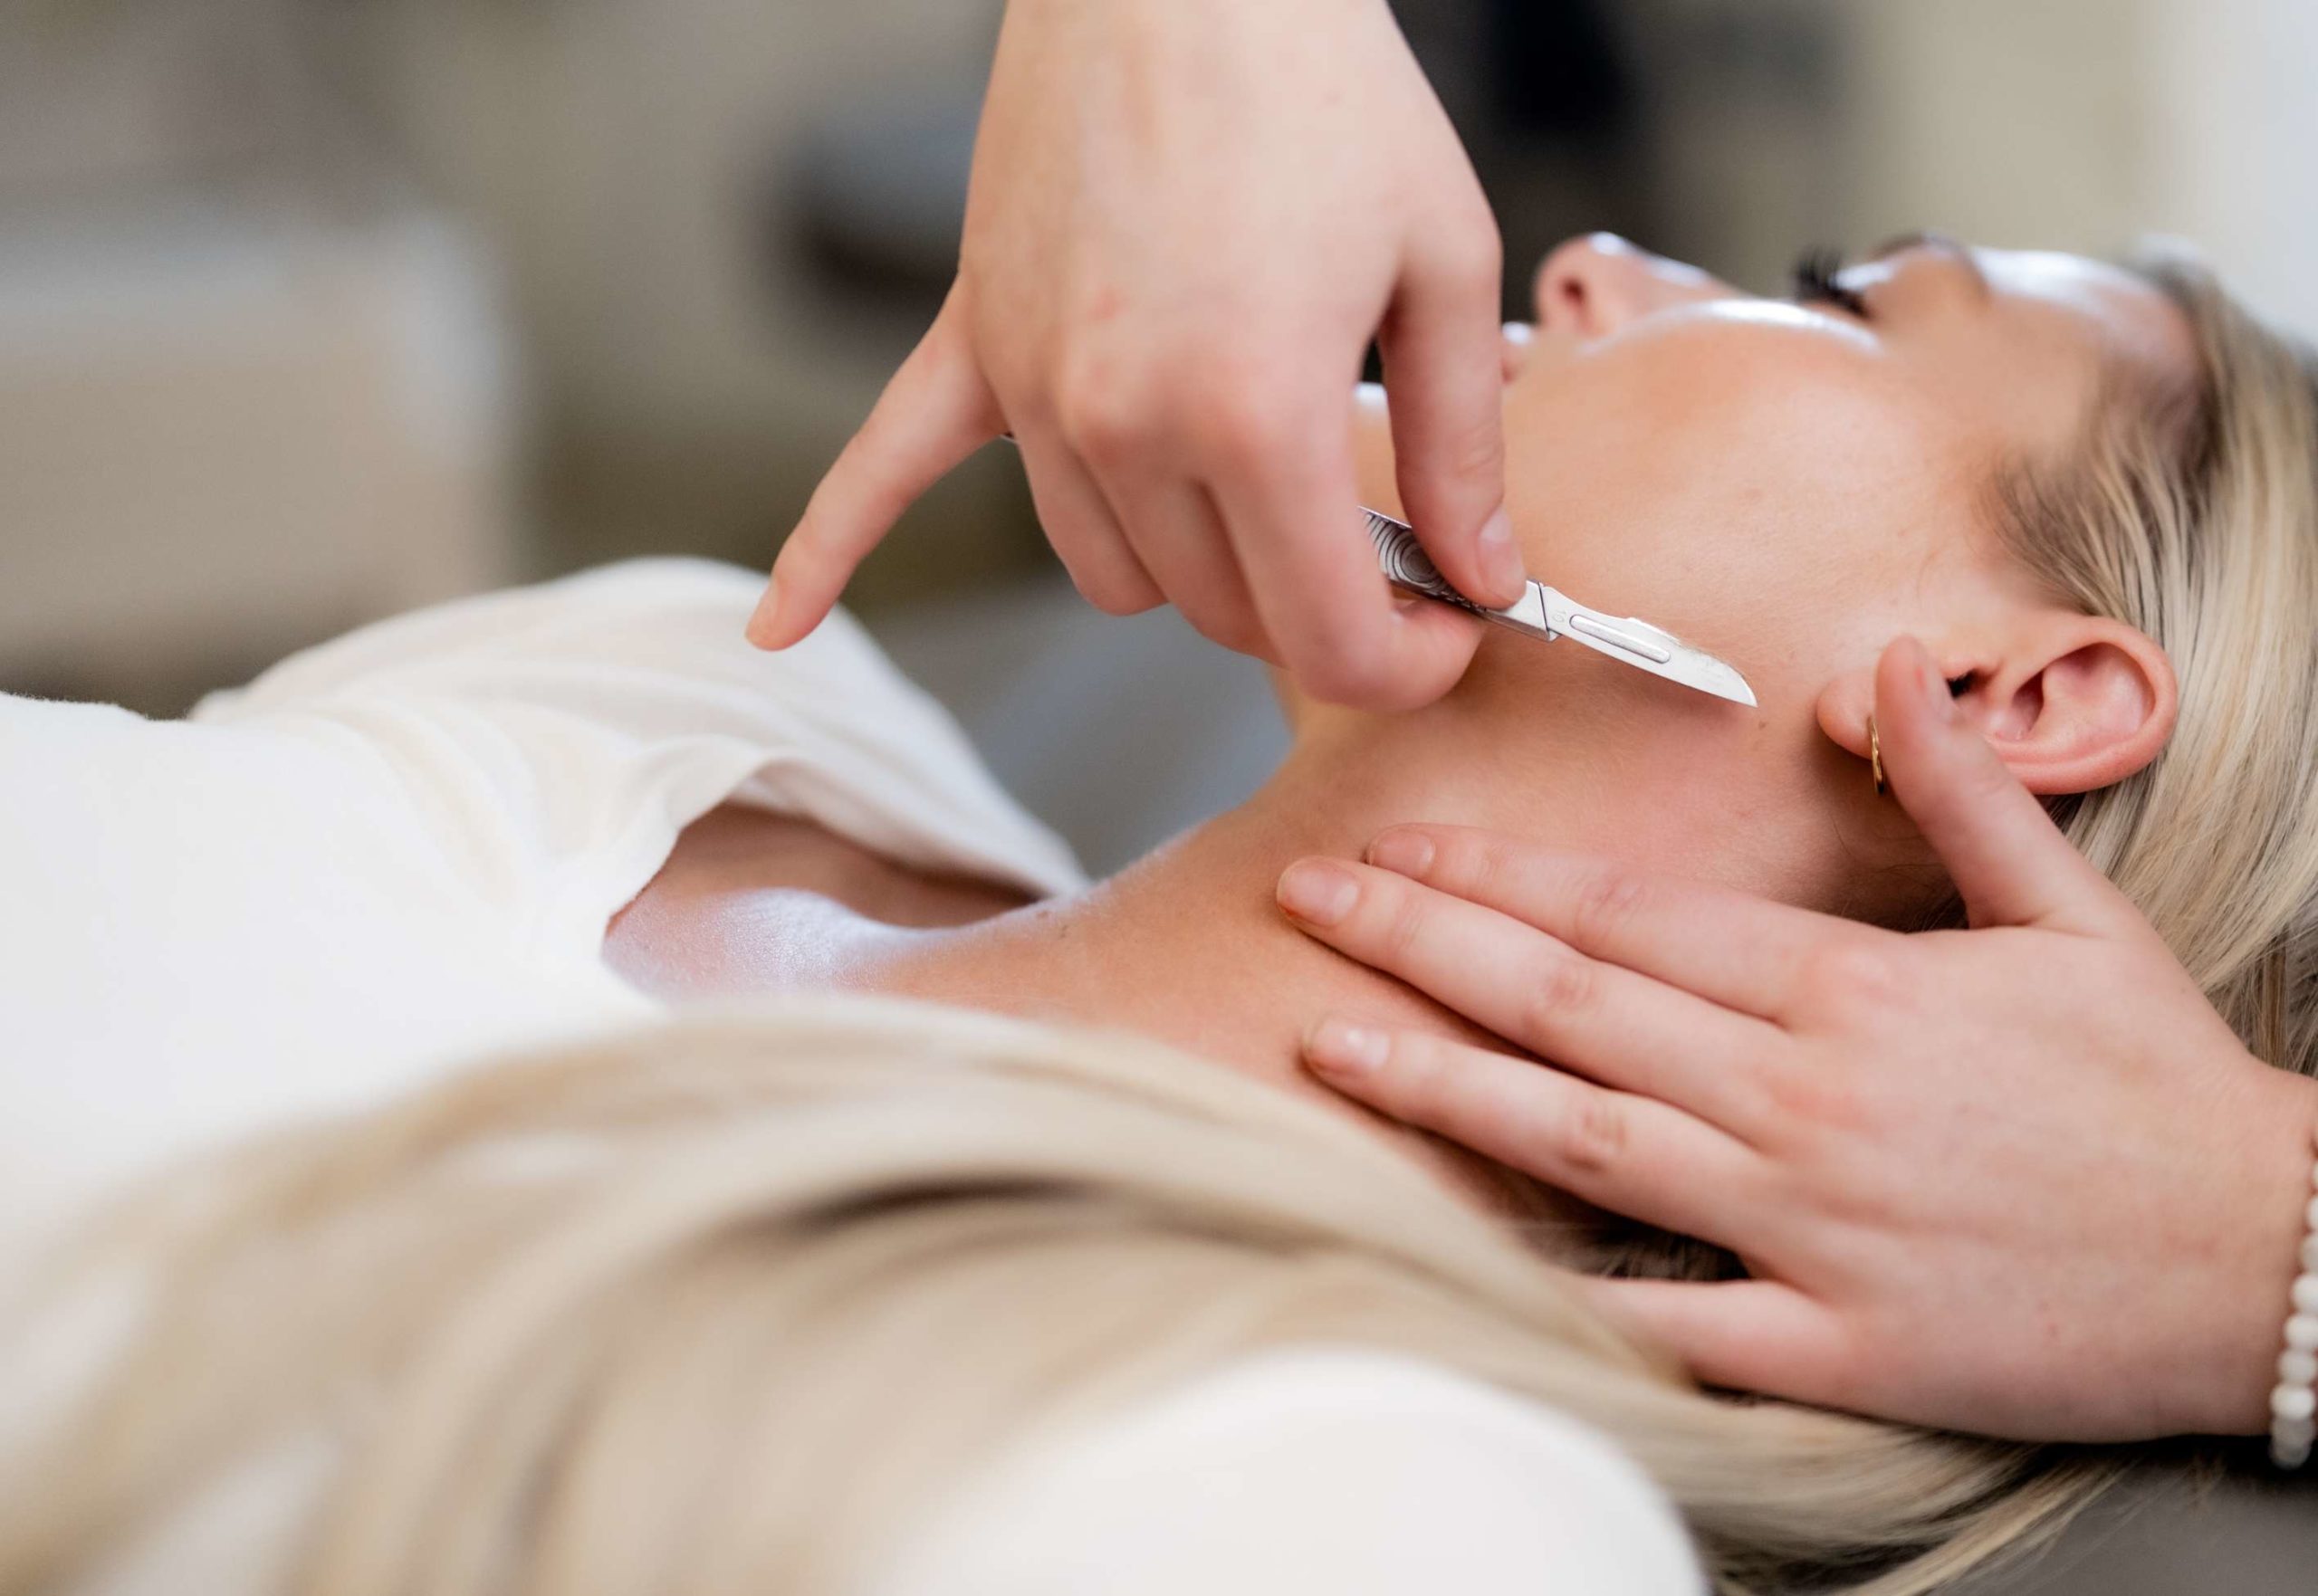 An esthetician giving her client a mini derma, or mini dermaplaning that the client used as an enhancement service.